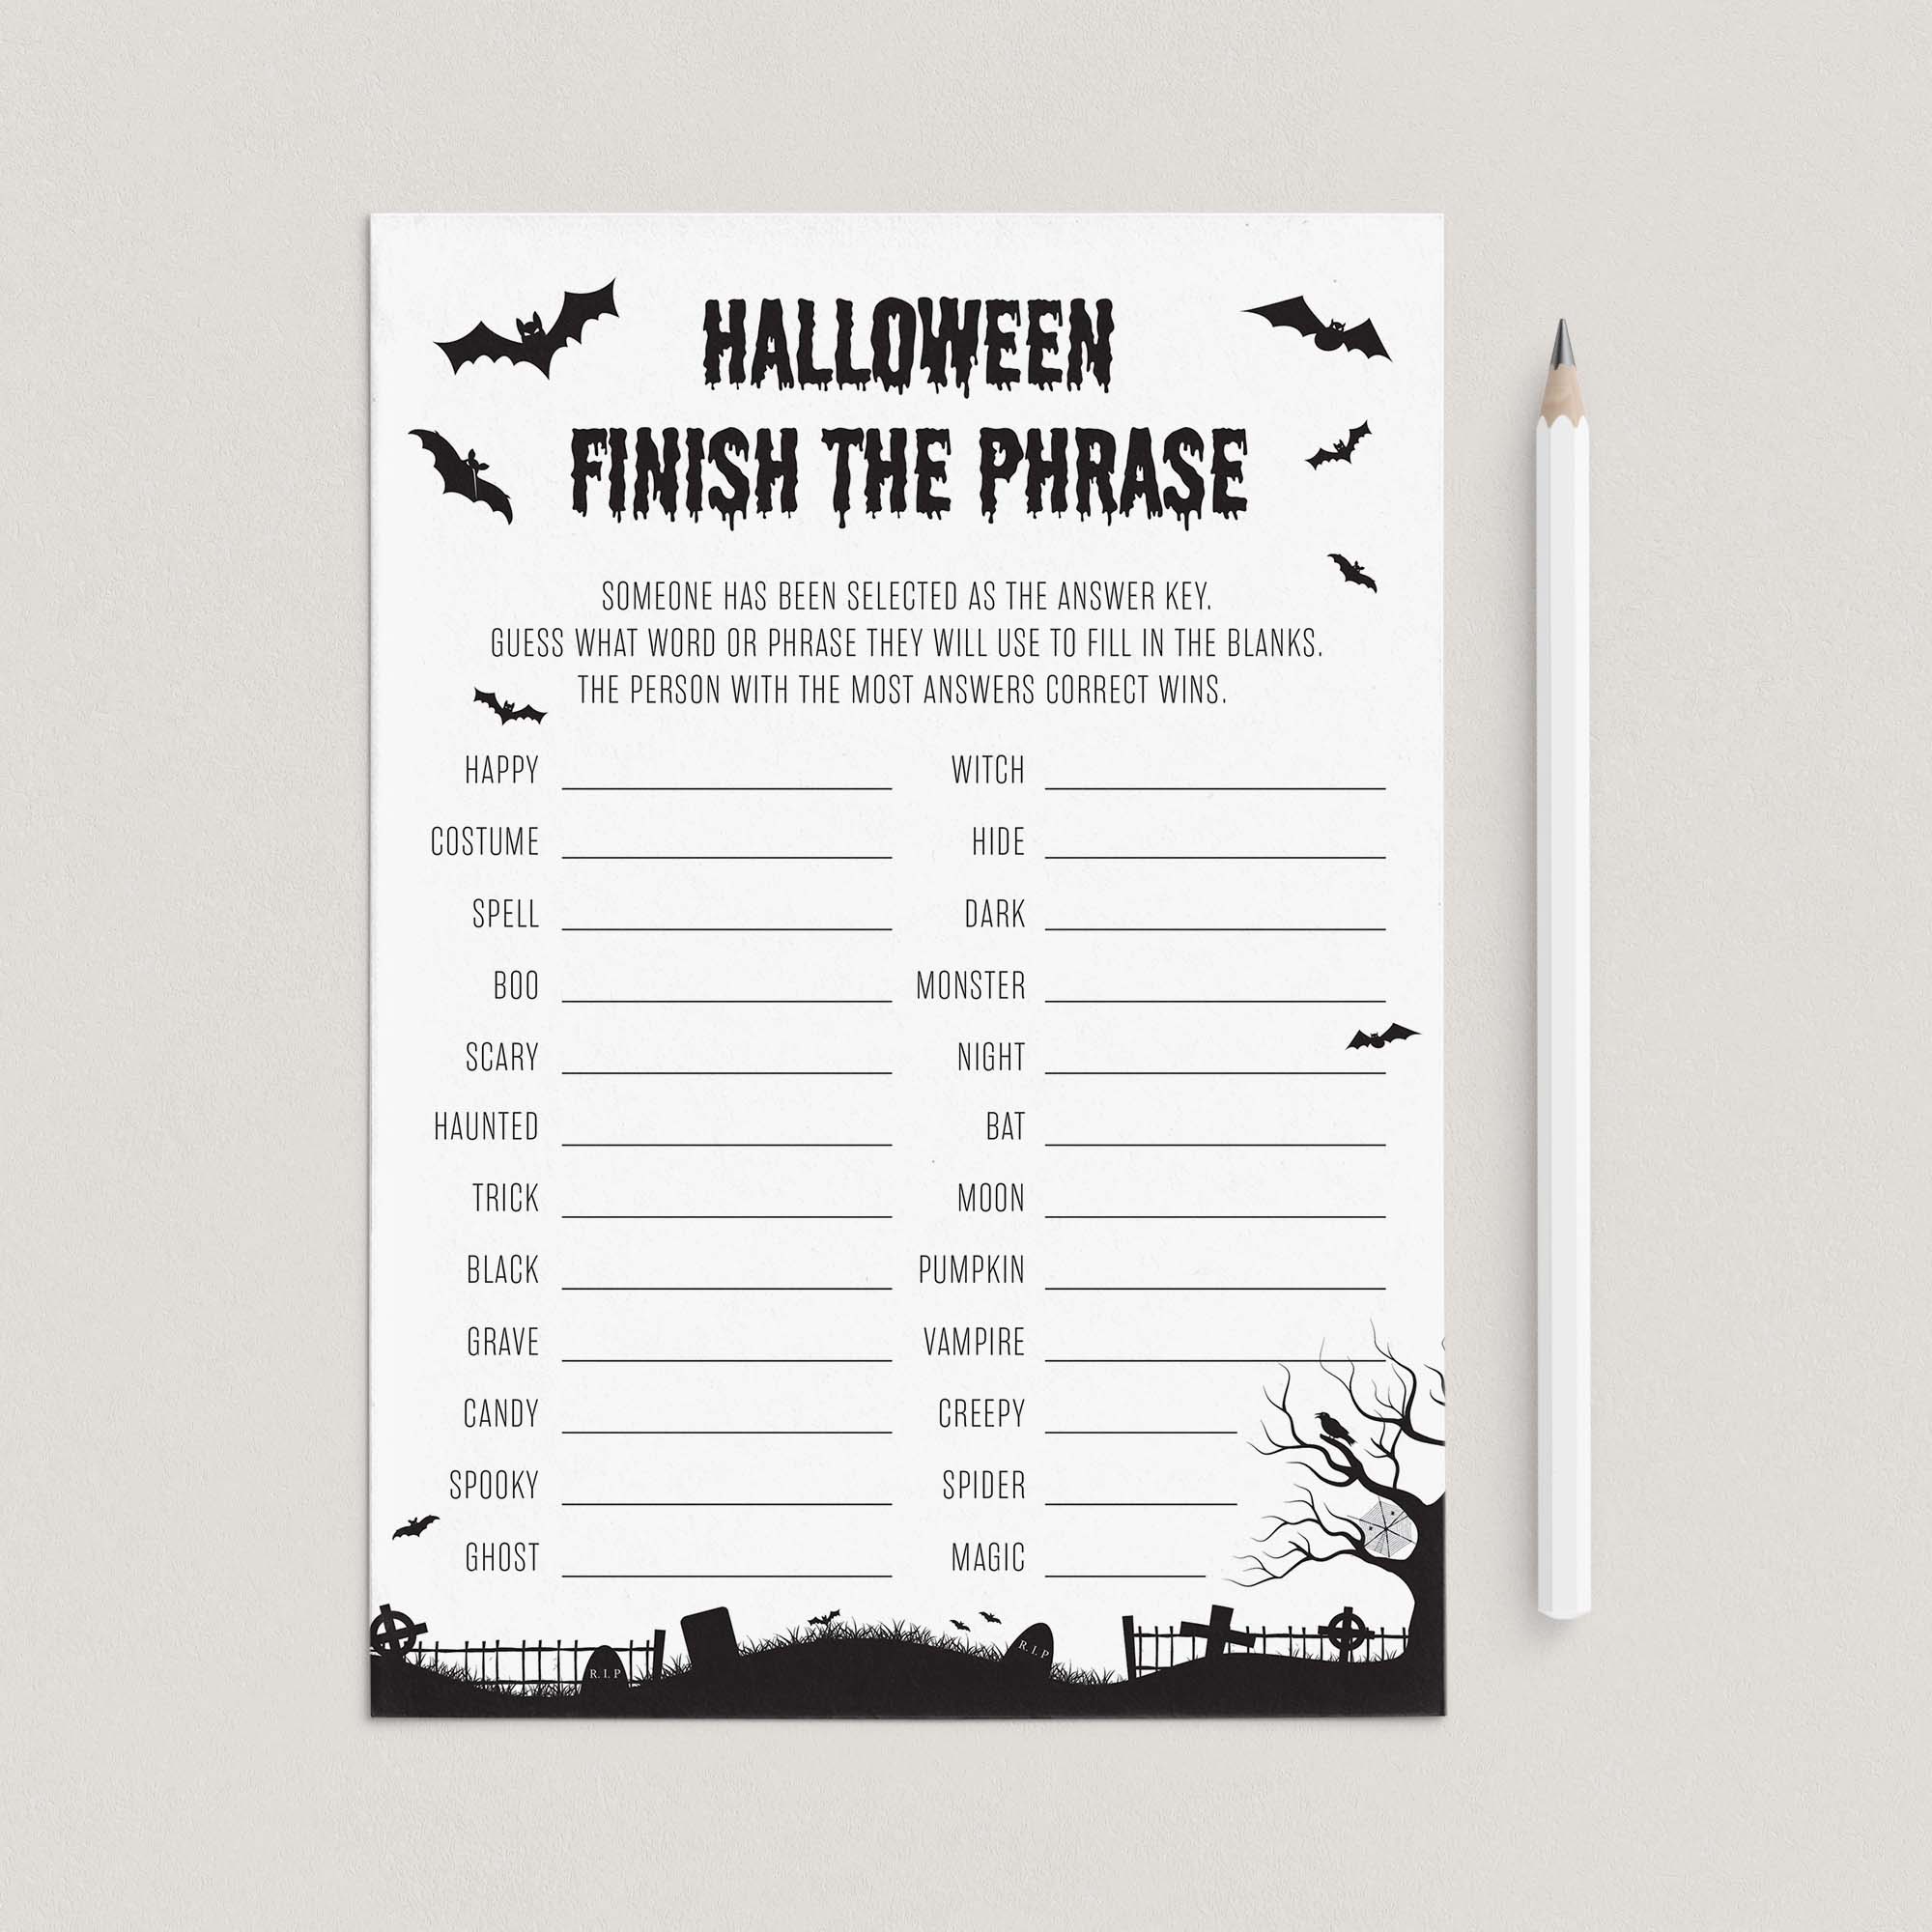 Black and White Halloween Party Game for Groups Printable Finish The Phrase by LittleSizzle